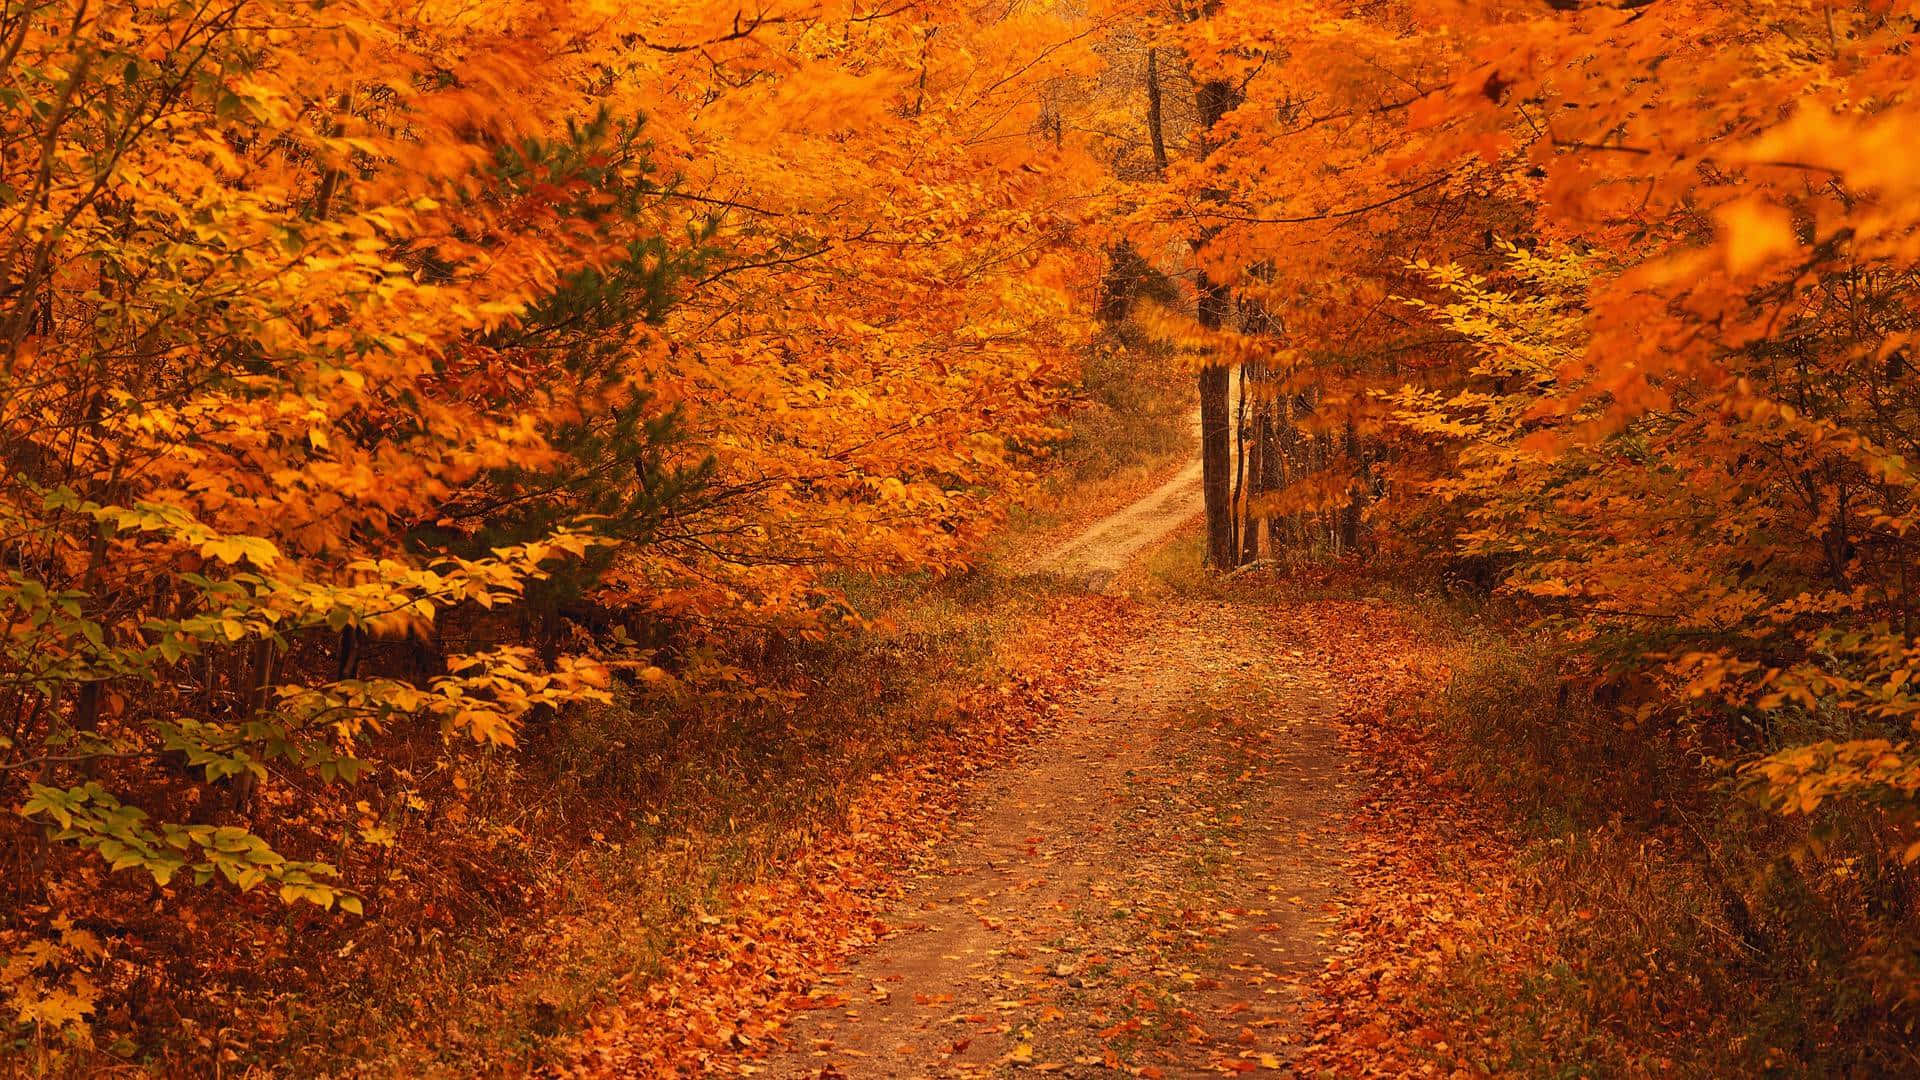 Enjoy the beauty of Fall with a stunning Desktop background